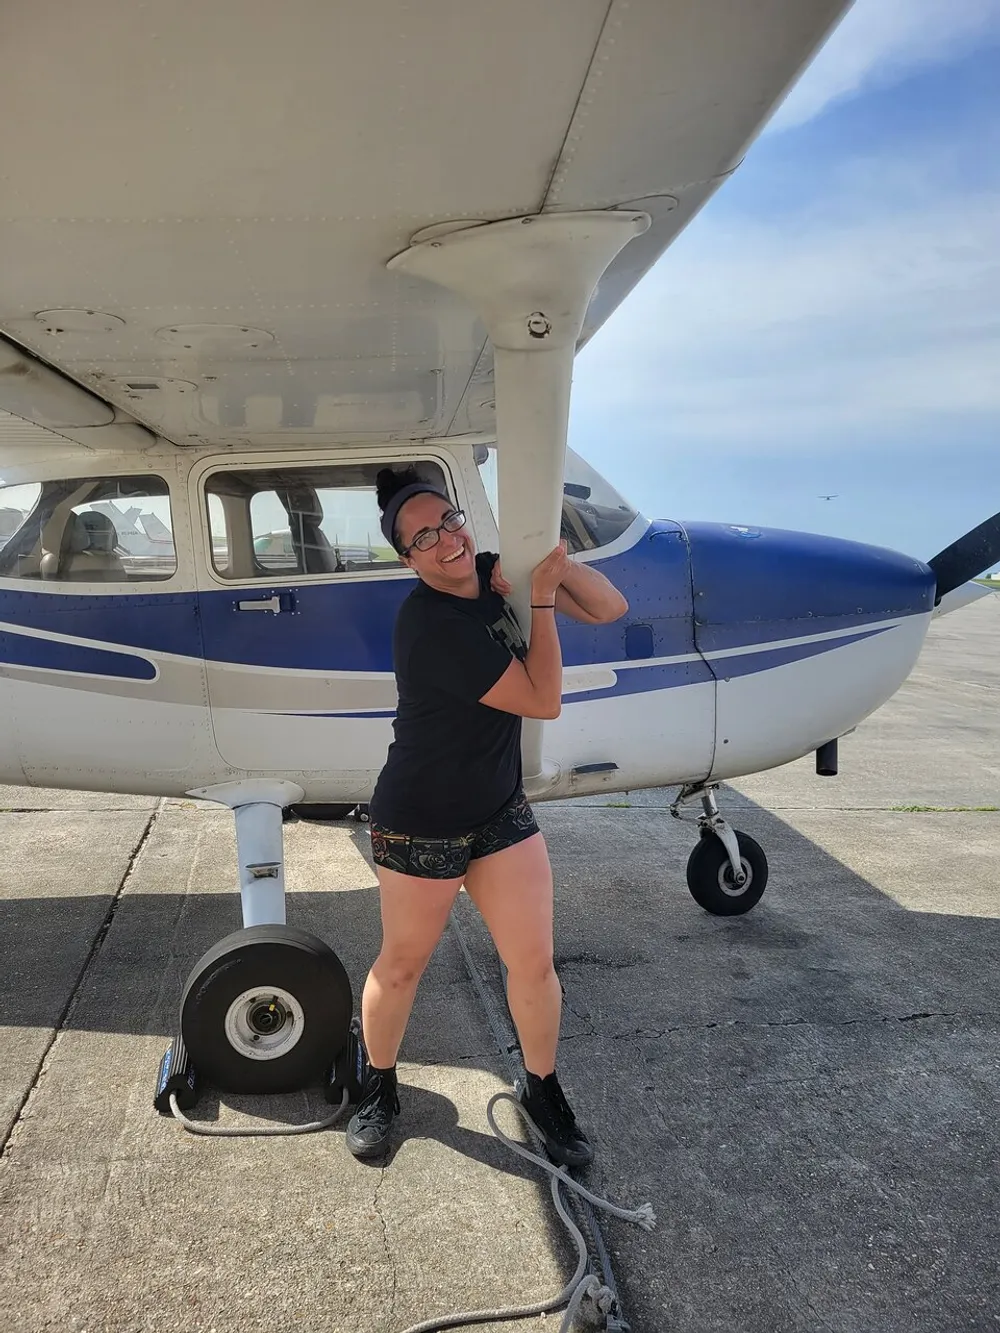 A smiling woman is playfully posing with her arms around the strut of a small single-engine airplane parked on the tarmac